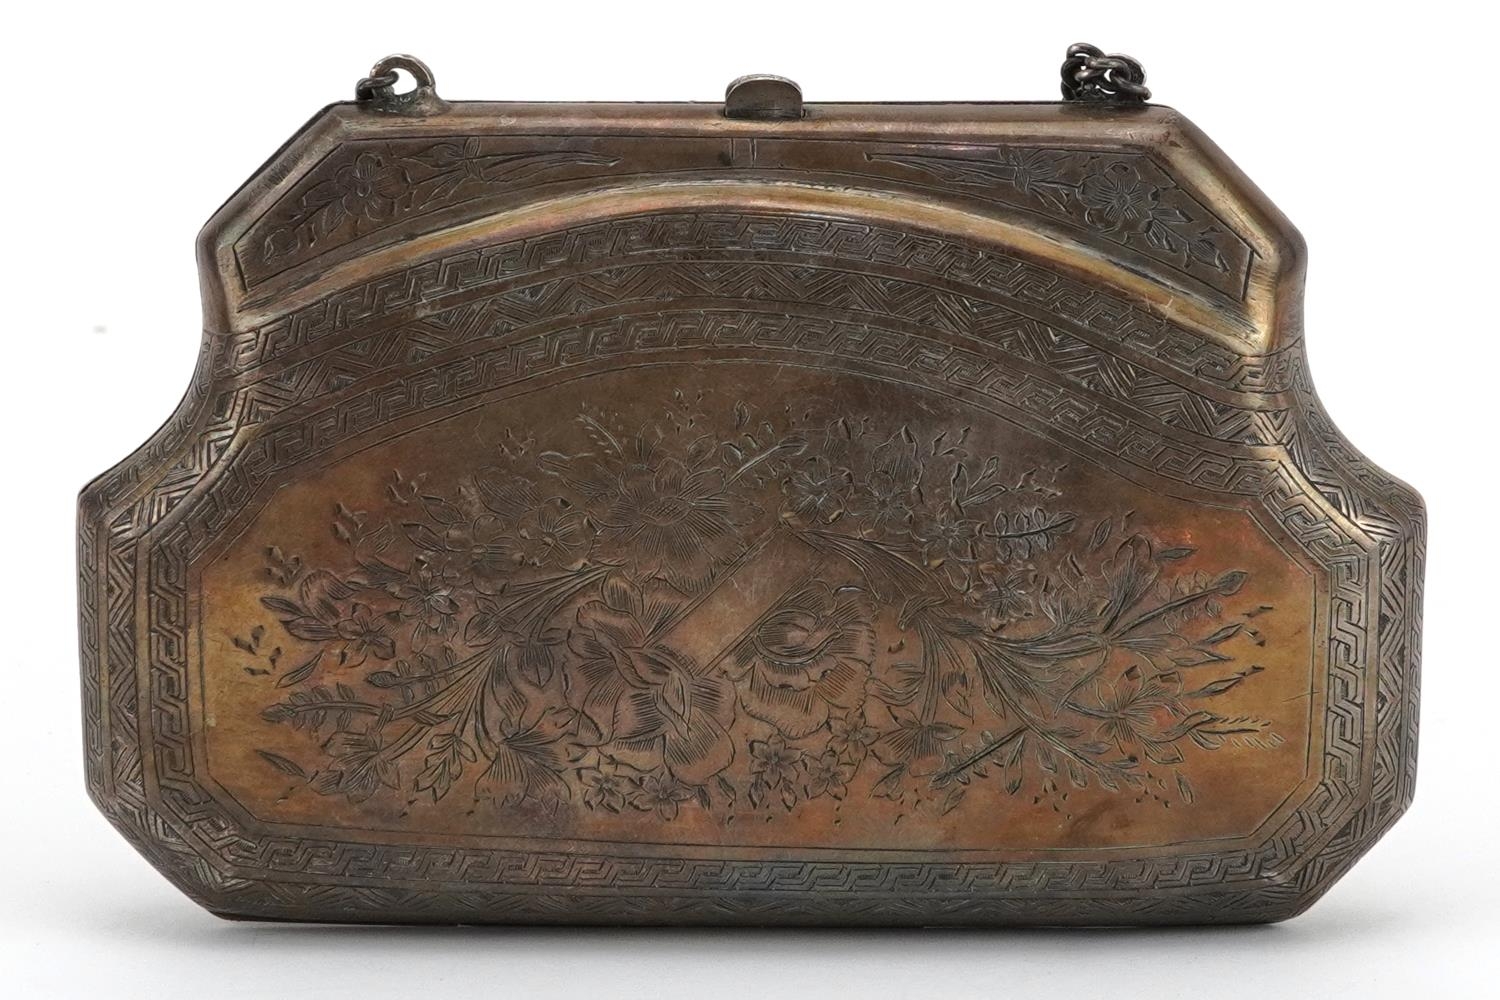 19th century heavy unmarked silver concertina purse profusely engraved with foliage, tests as